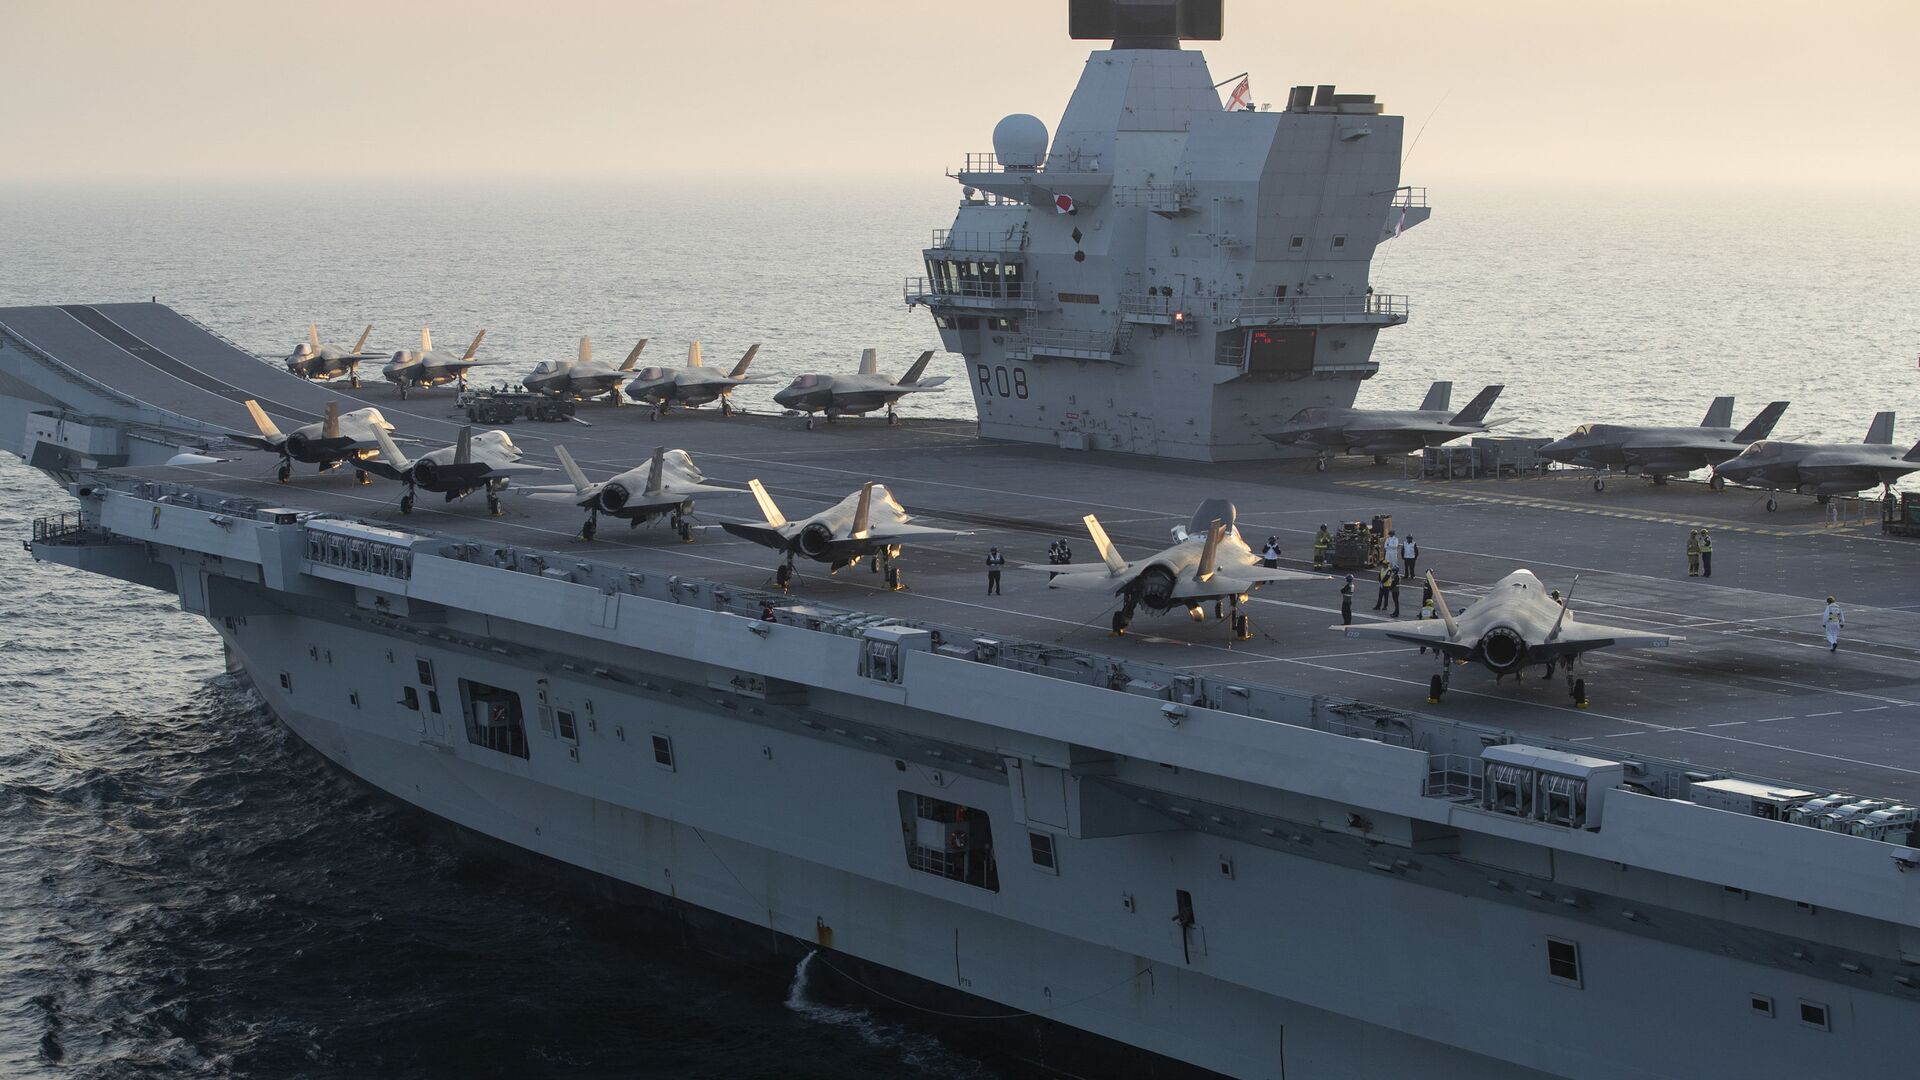 F-35B Lightning II Joint Strike Fighters assigned to Marine Fighter Attack Squadron (VMFA) 211 The Wake Island Avengers  and the United Kingdom's Lightning 617 Squadron shortly after embarking onboard HMS Queen Elizabeth on 22 September, 2020, off the coast of the United Kingdom. - اسپوتنیک افغانستان  , 1920, 25.01.2022